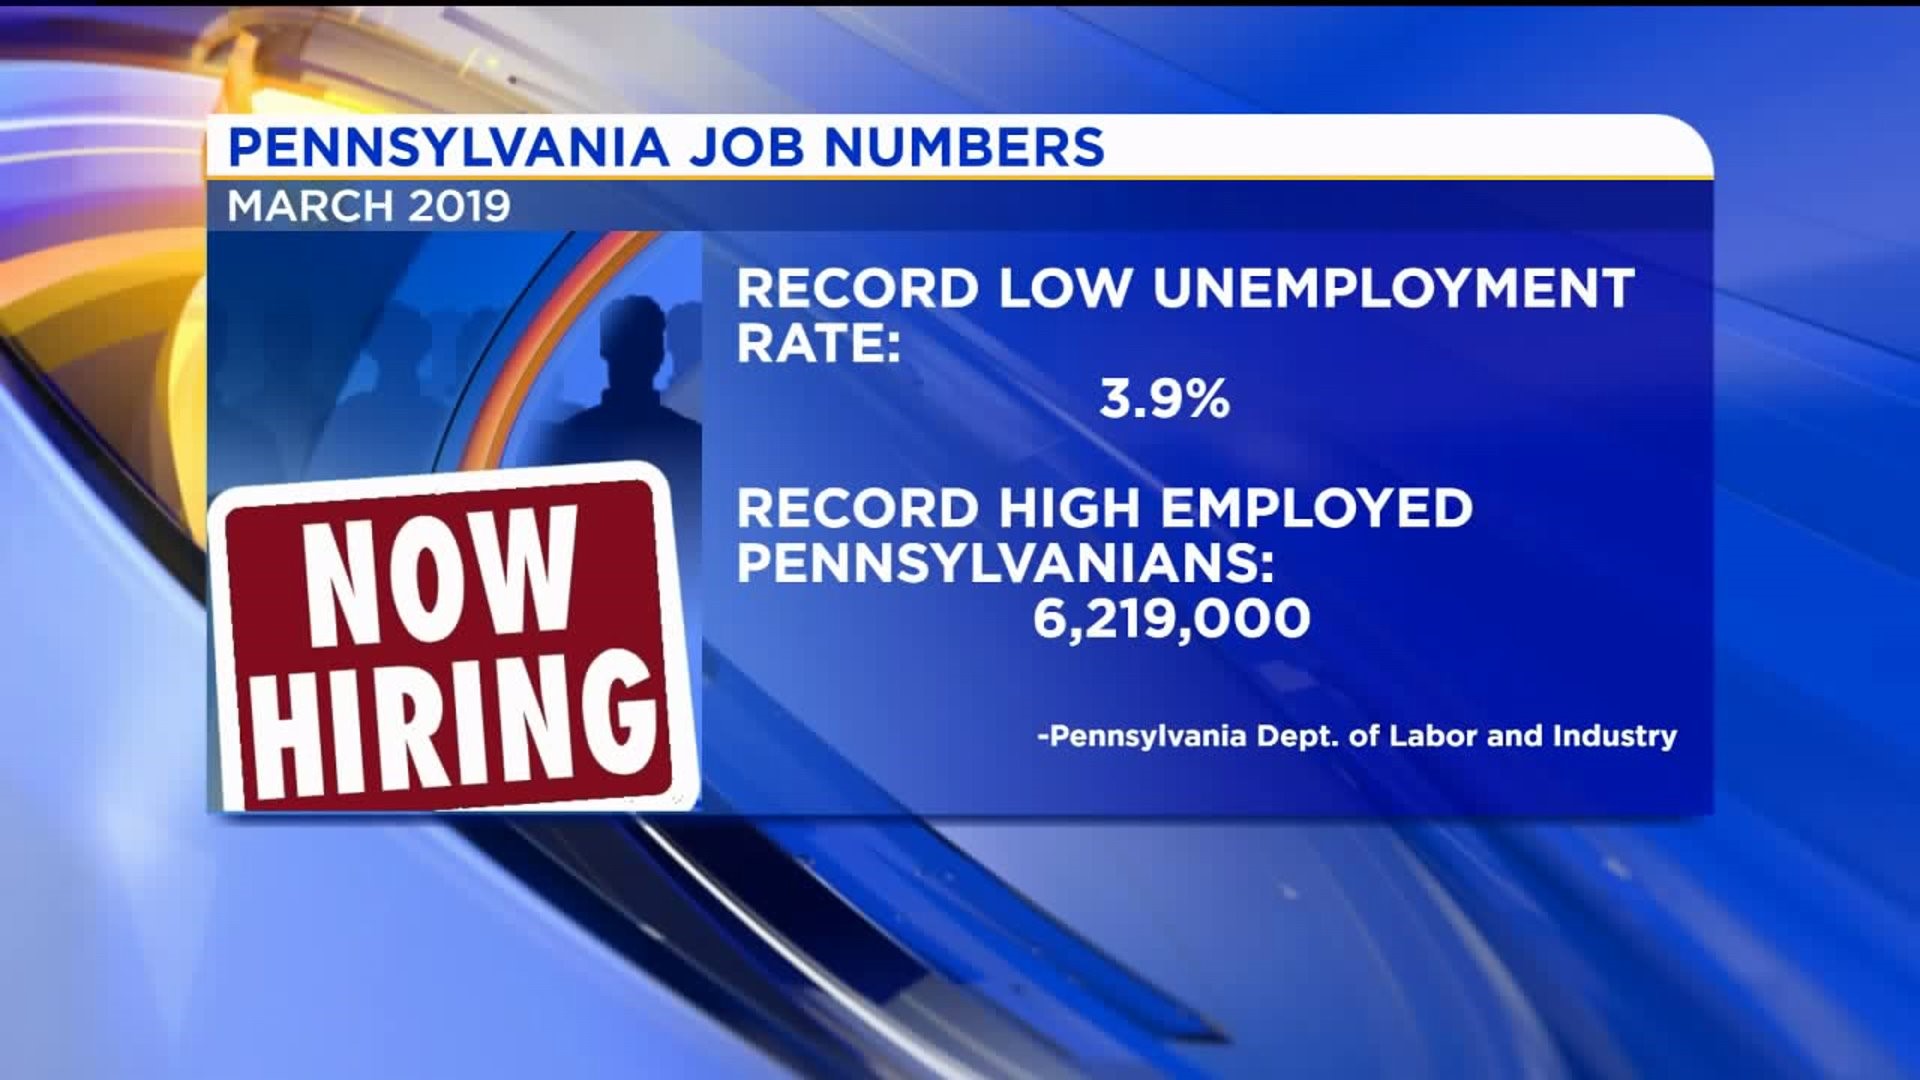 Unemployment Rate Hits Record Low in Pennsylvania